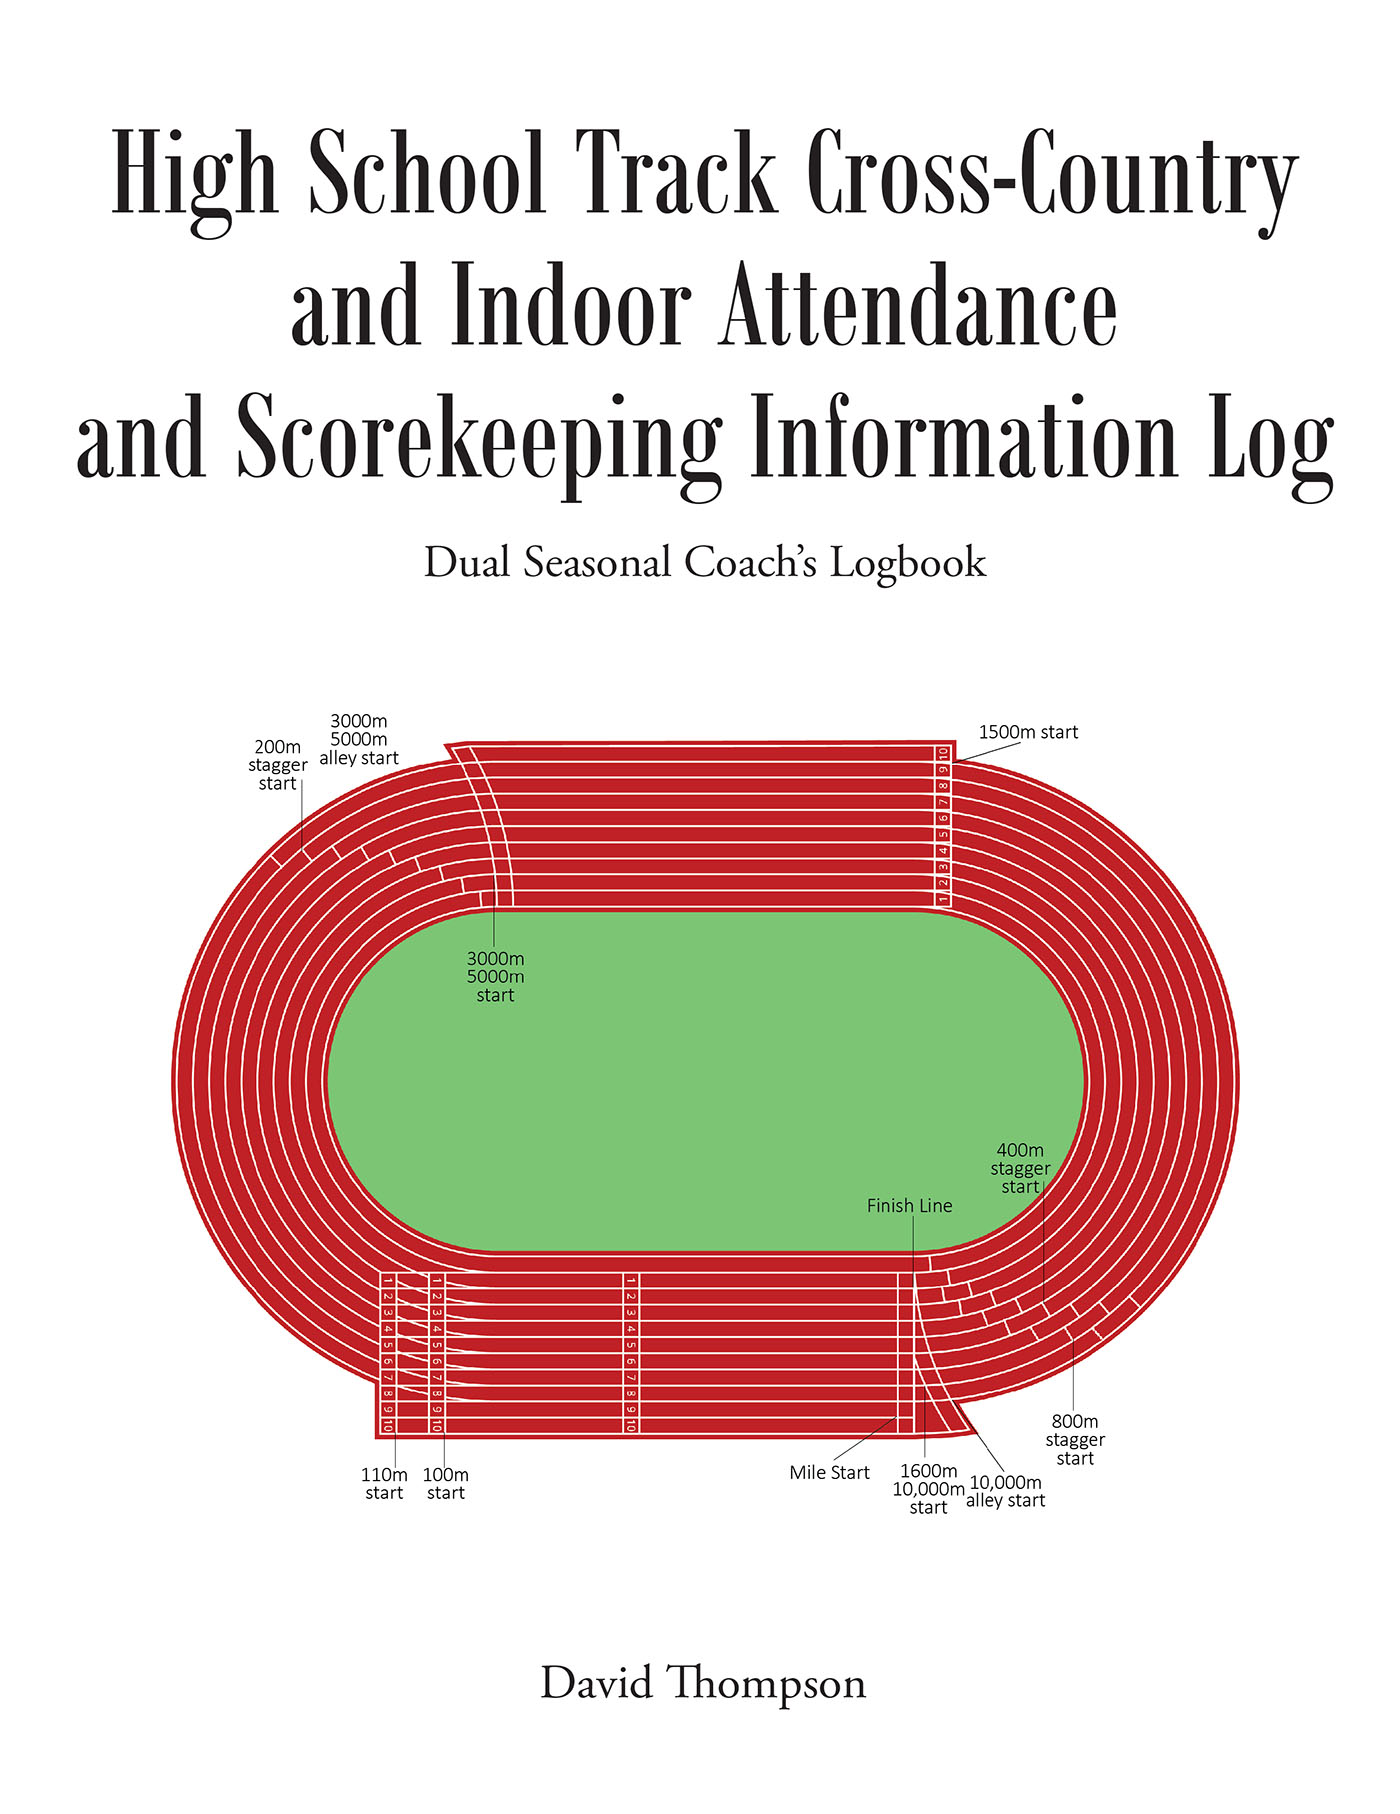 High School Track Cross-Country and Indoor Attendance and Scorekeeping Information Log Cover Image